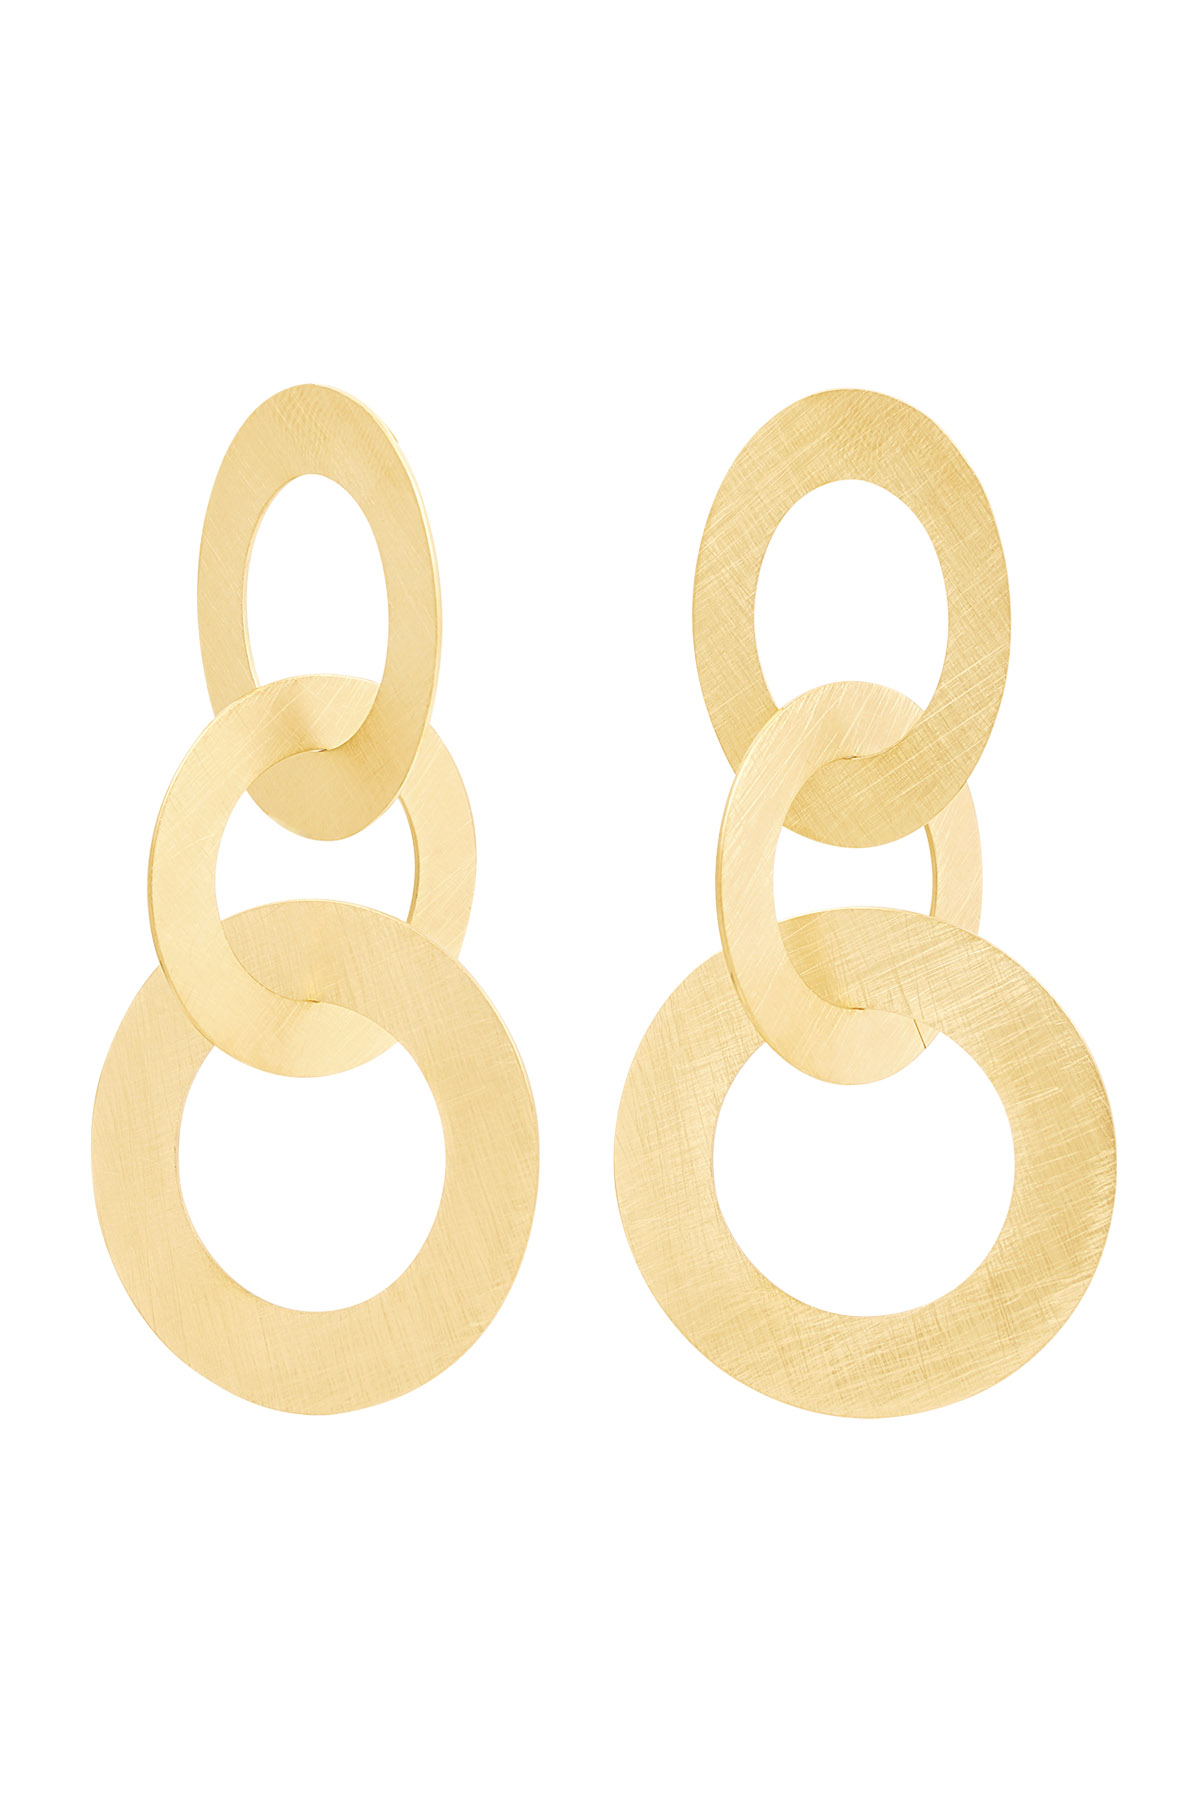 Earrings 3 circles - gold Stainless Steel